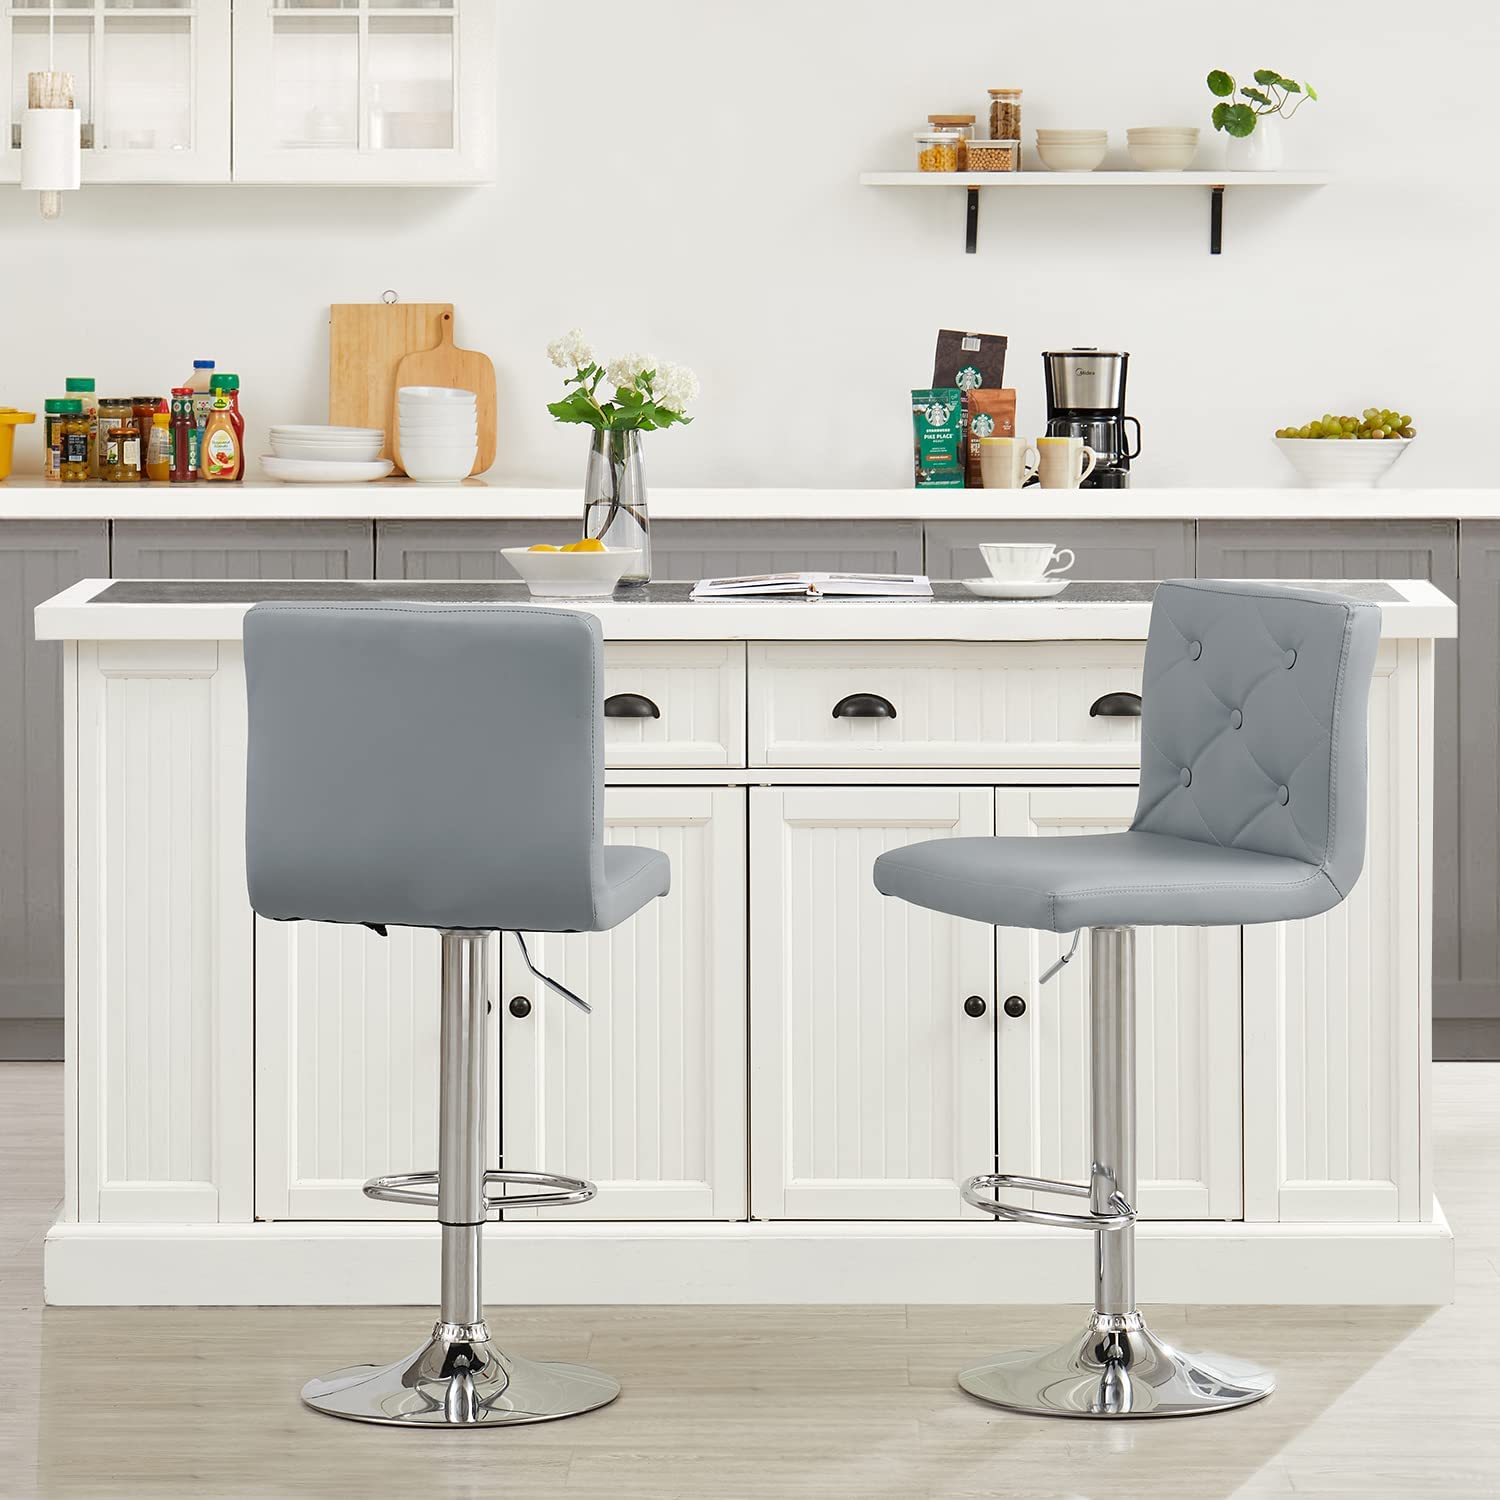 VECELO Kitchen Island Counter Height Chairs/Bar Stools with PU Leather Back&Swivel Adjustable Seat, Set of 2